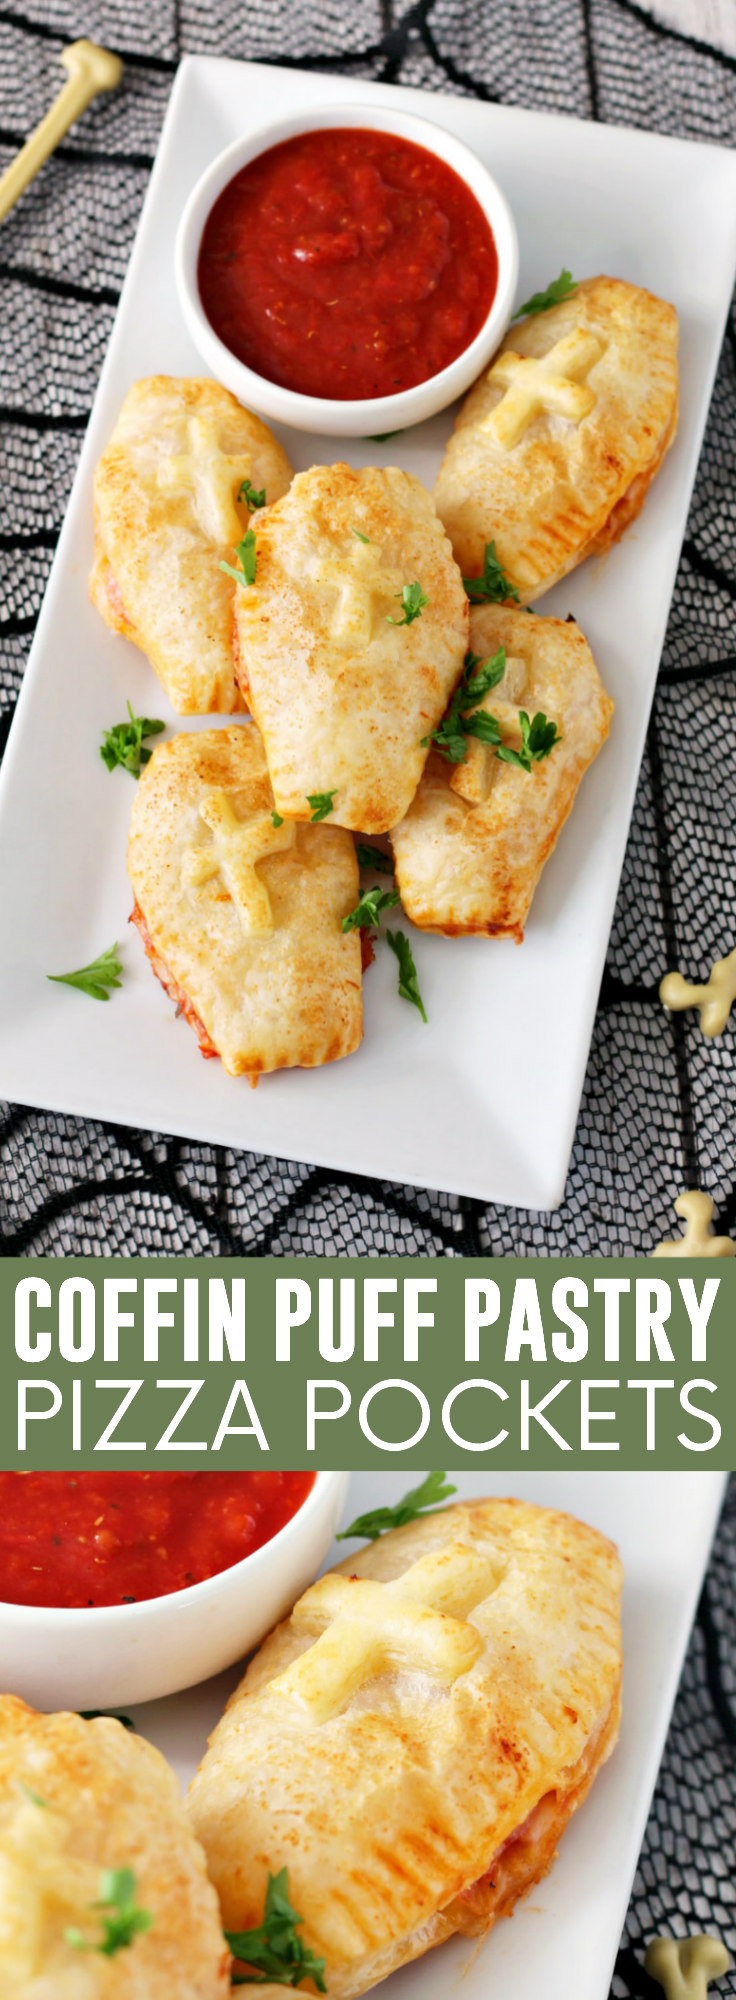 Coffin Puff Pastry Pizza Pockets pinnable image.